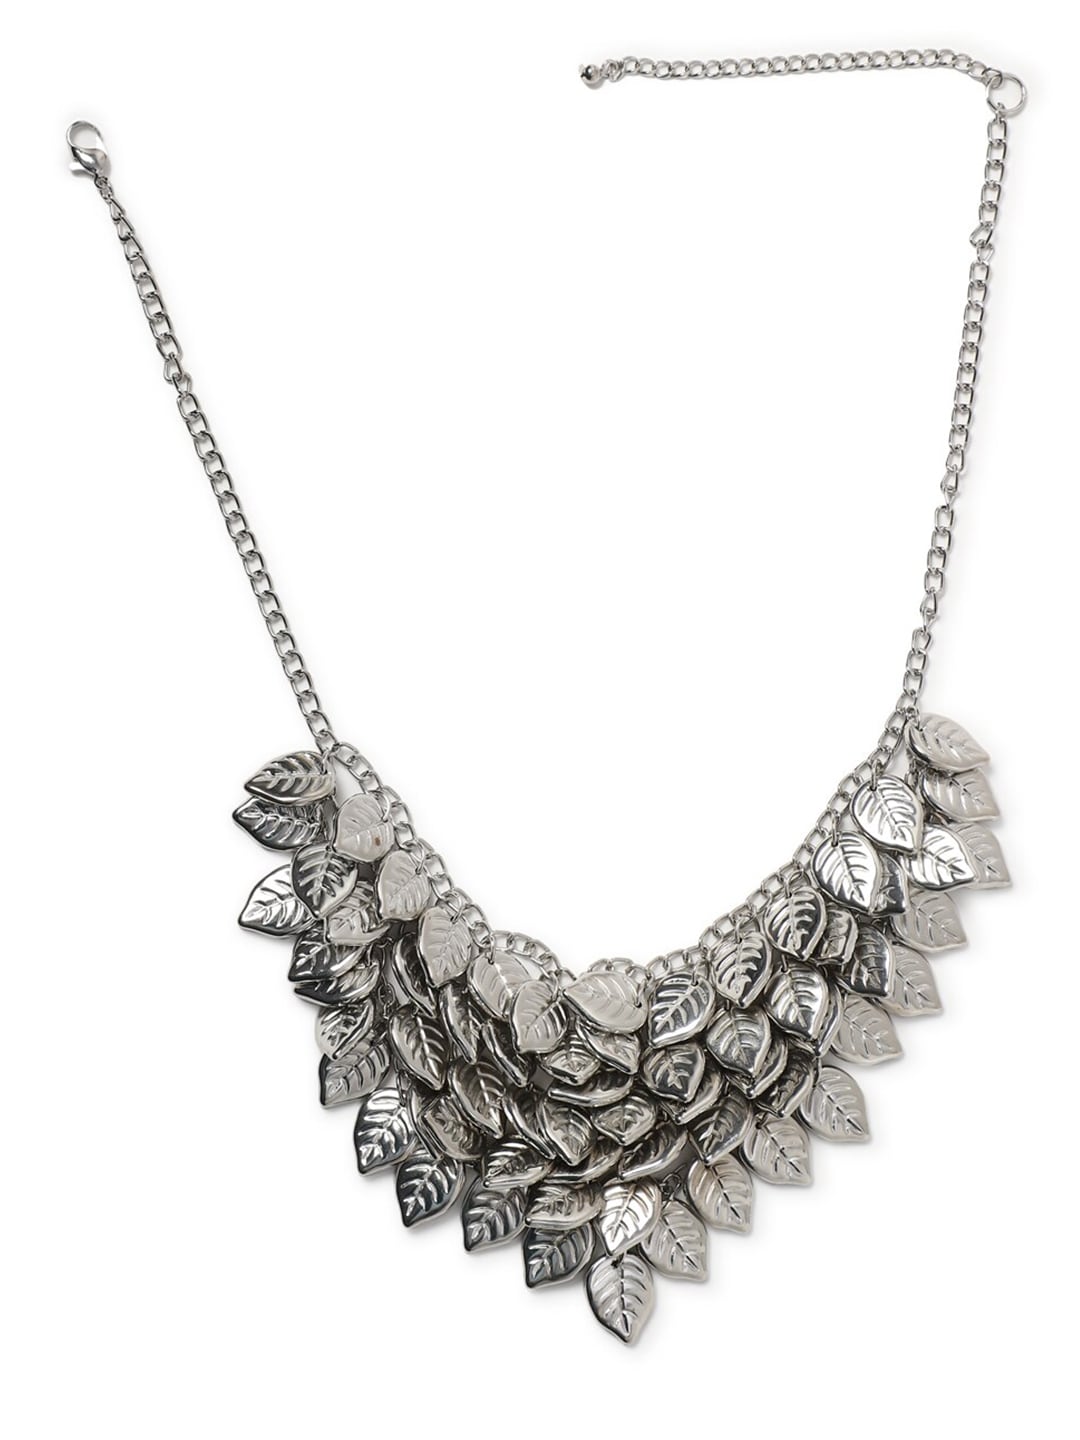 FOREVER 21 Silver-Toned Leaf Necklace Price in India